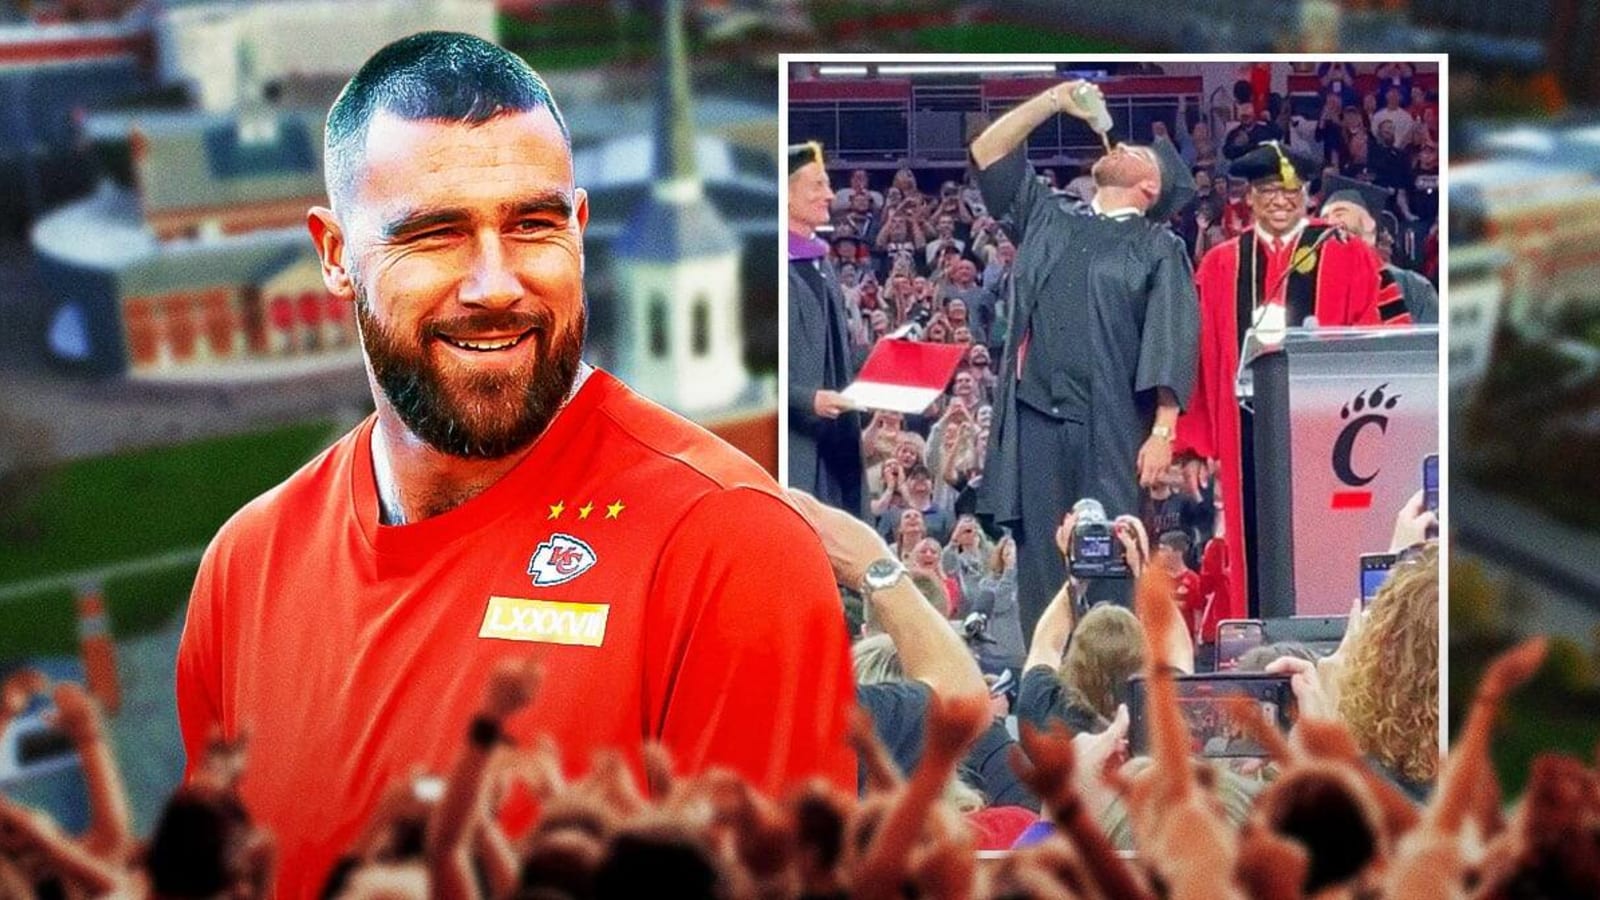 Chiefs Travis Kelce’s viral graduation ceremony beer chug has social media in a frenzy